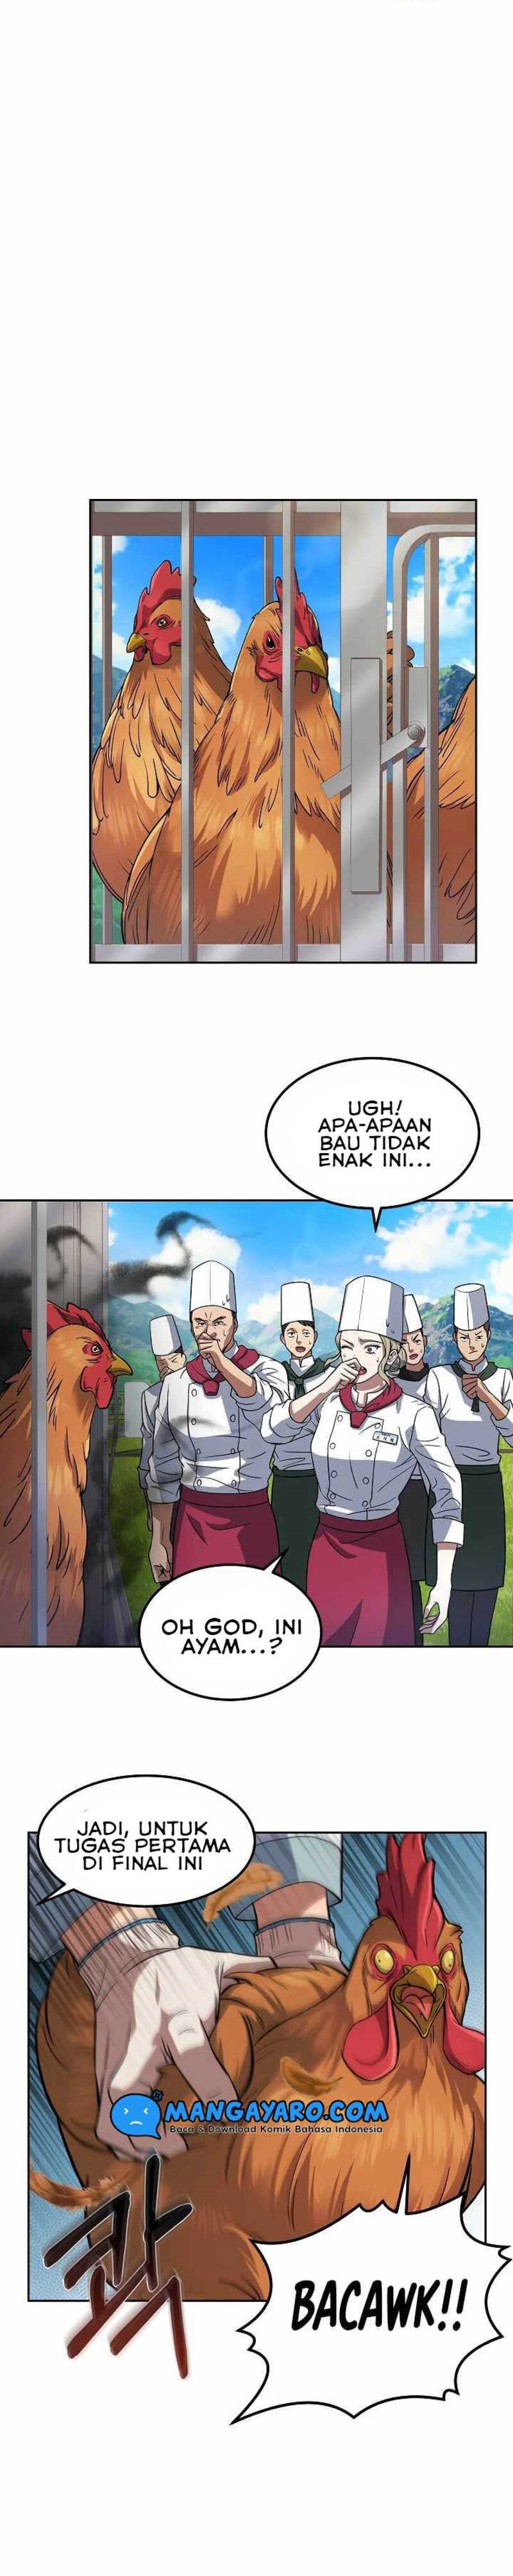 Youngest Chef From the 3rd Rate Hotel Chapter 20